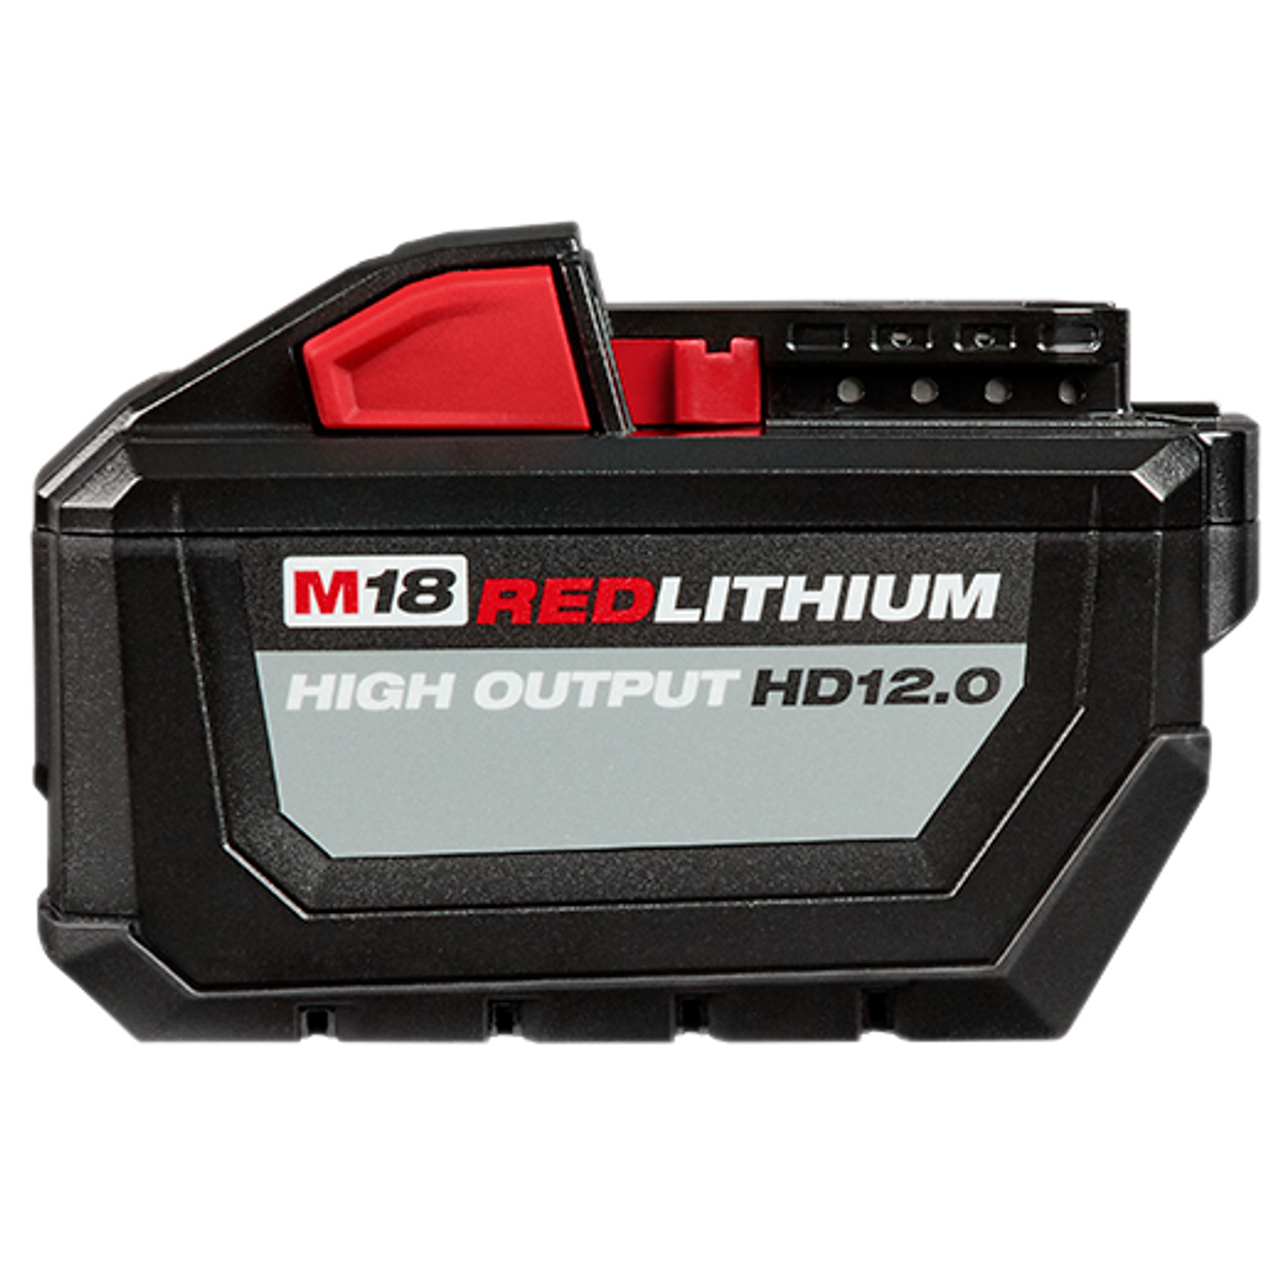 M18 REDLITHIUM HIGH OUTPUT HD12.0 Battery Pack